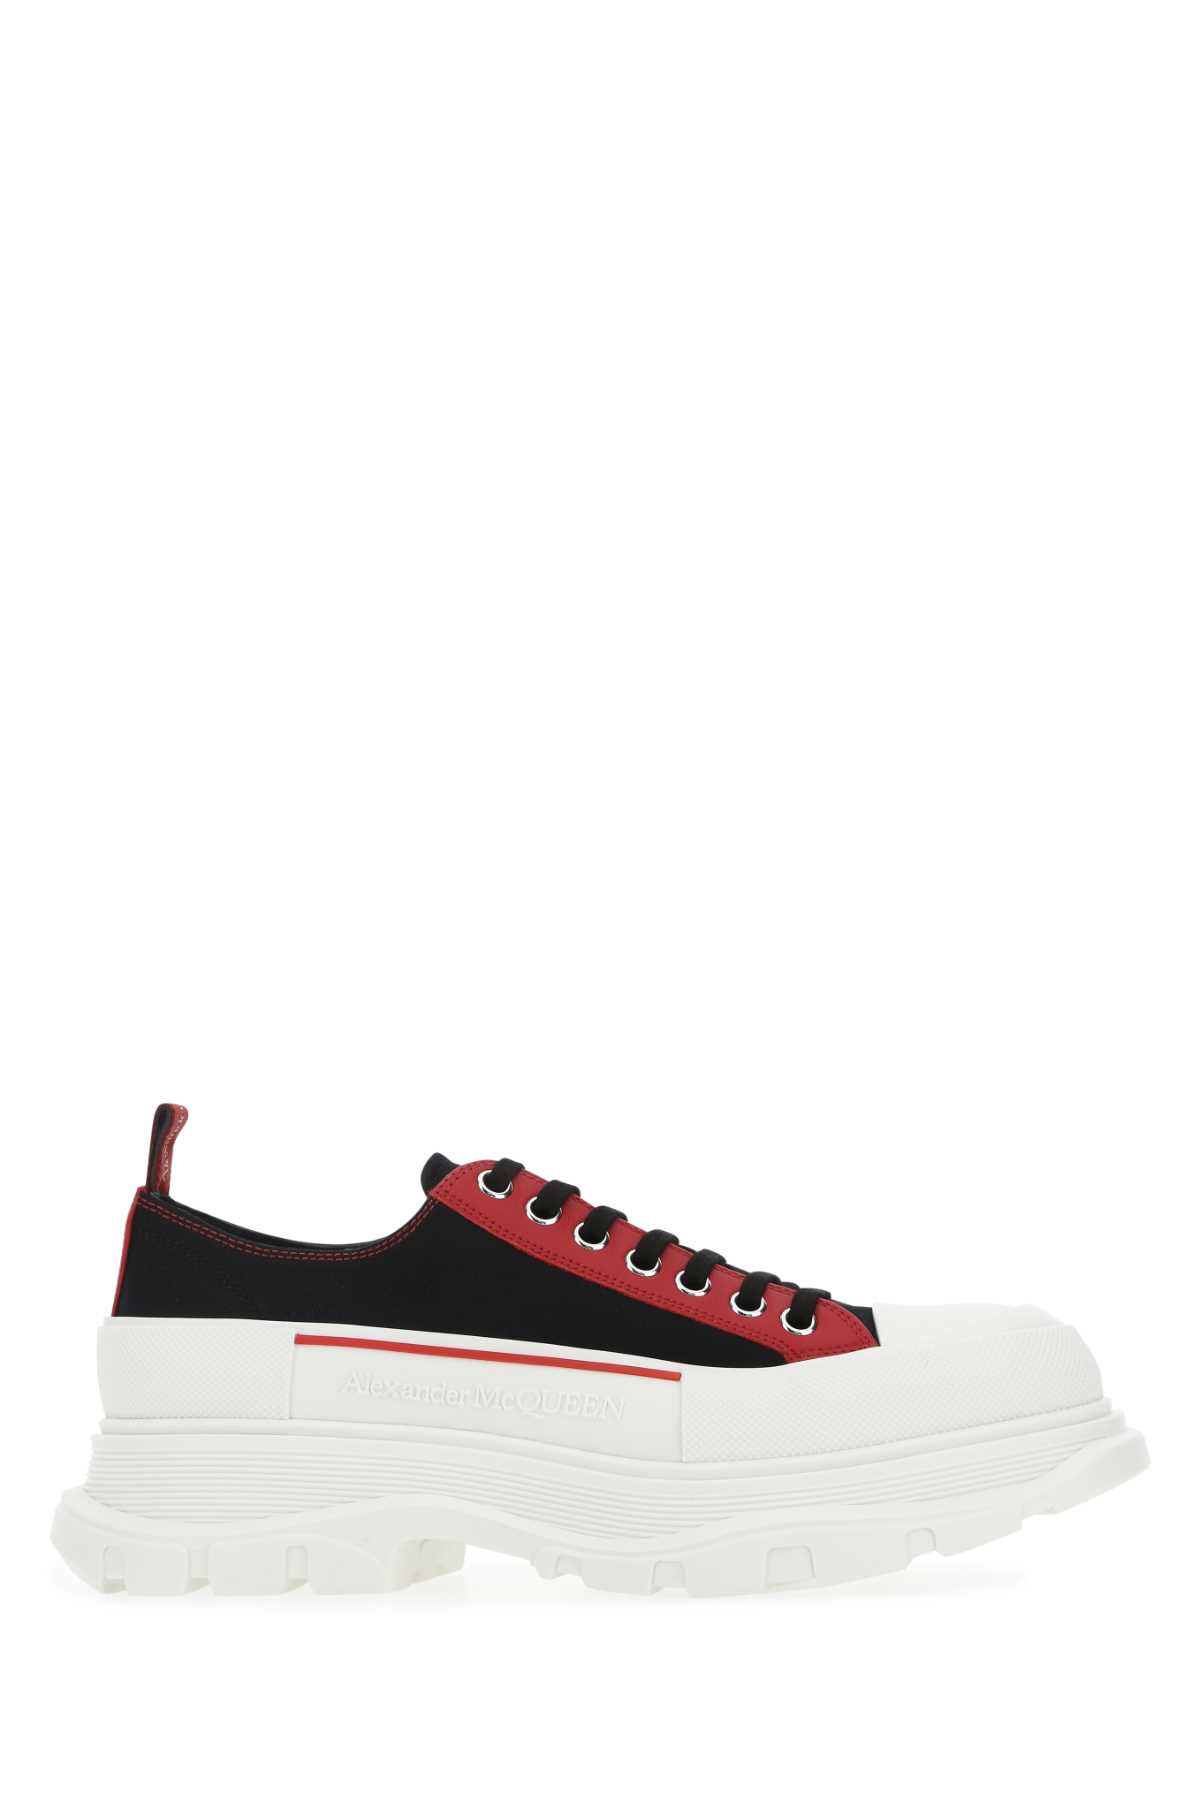 Multicolor Canvas And Leather Tread Slick Sneakers